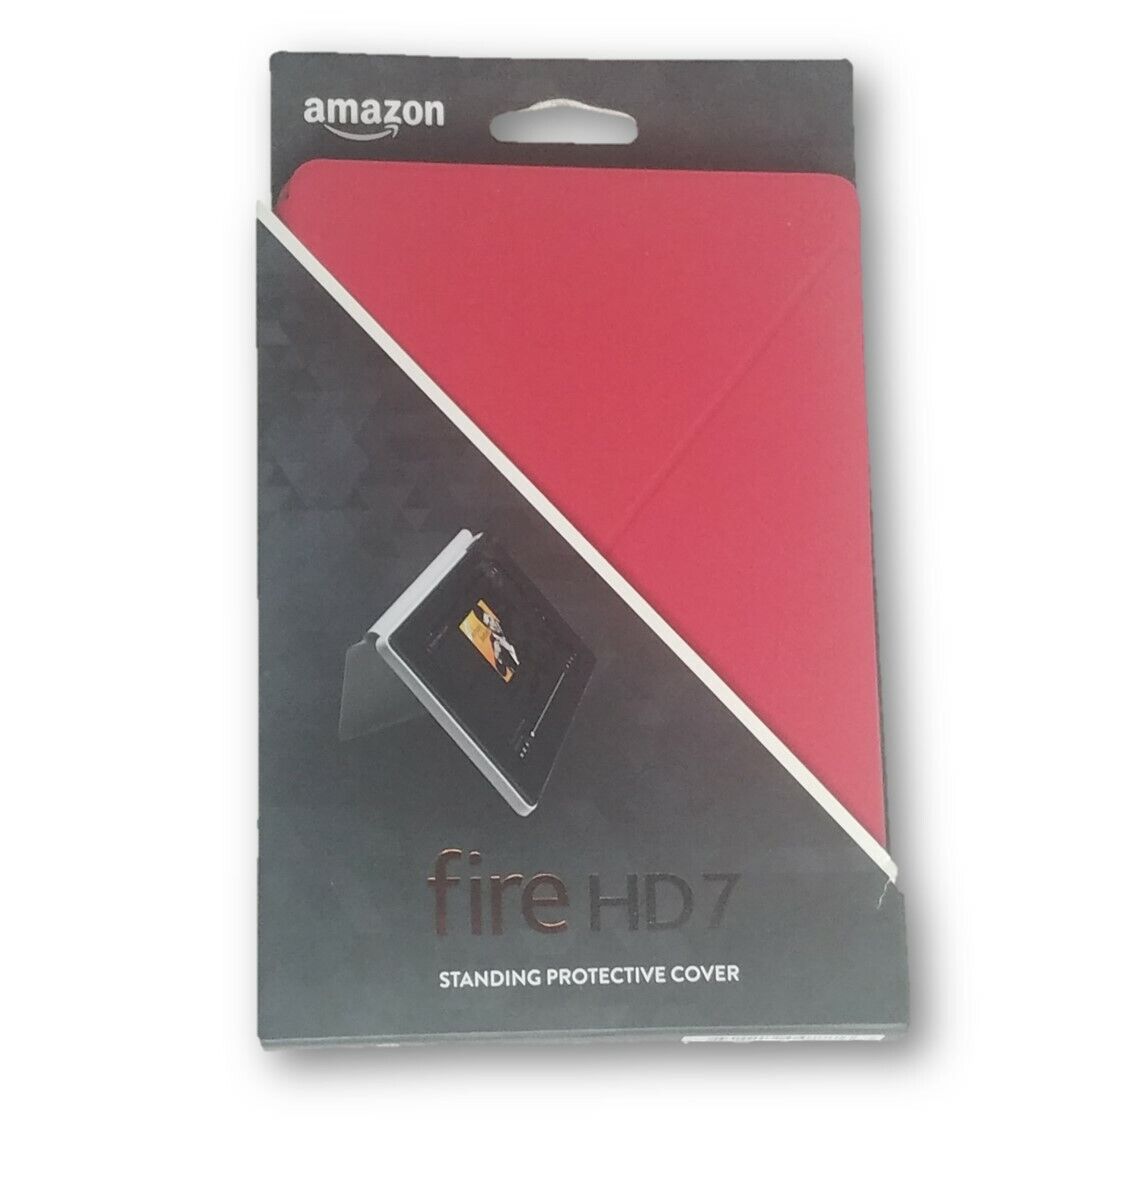 AMAZON STANDING PROTECTIVE CASE FOR KINDLE FIRE HD 7 (4TH GENERATION) CAYENNE